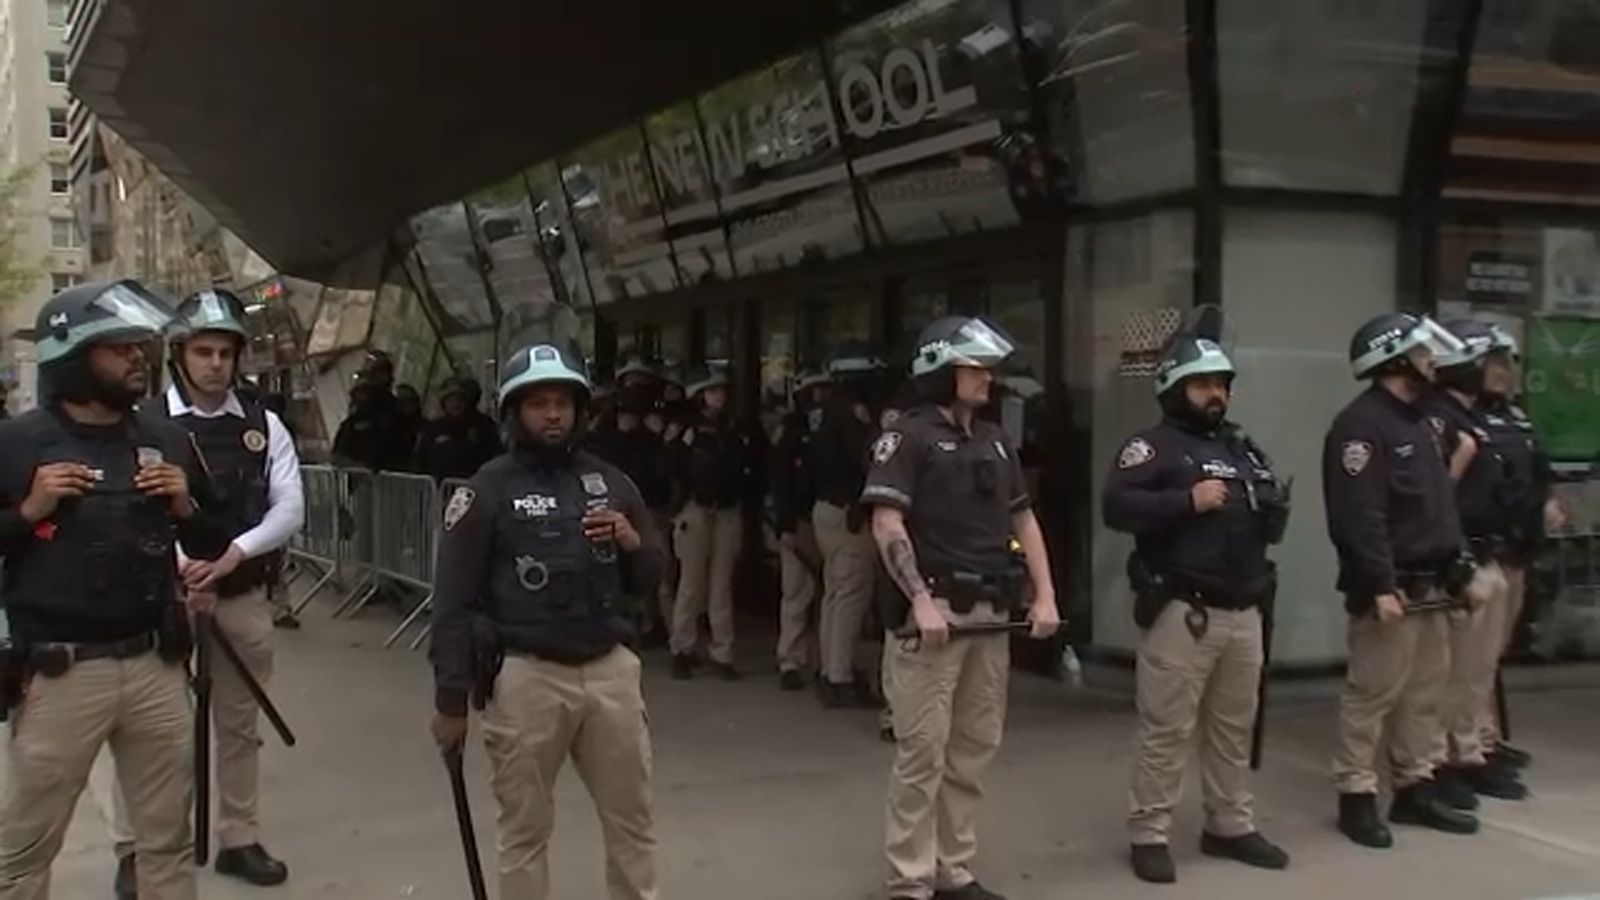 Campus protests: Dozens arrested as NYPD clears out demonstrations at NYU, New School [Video]